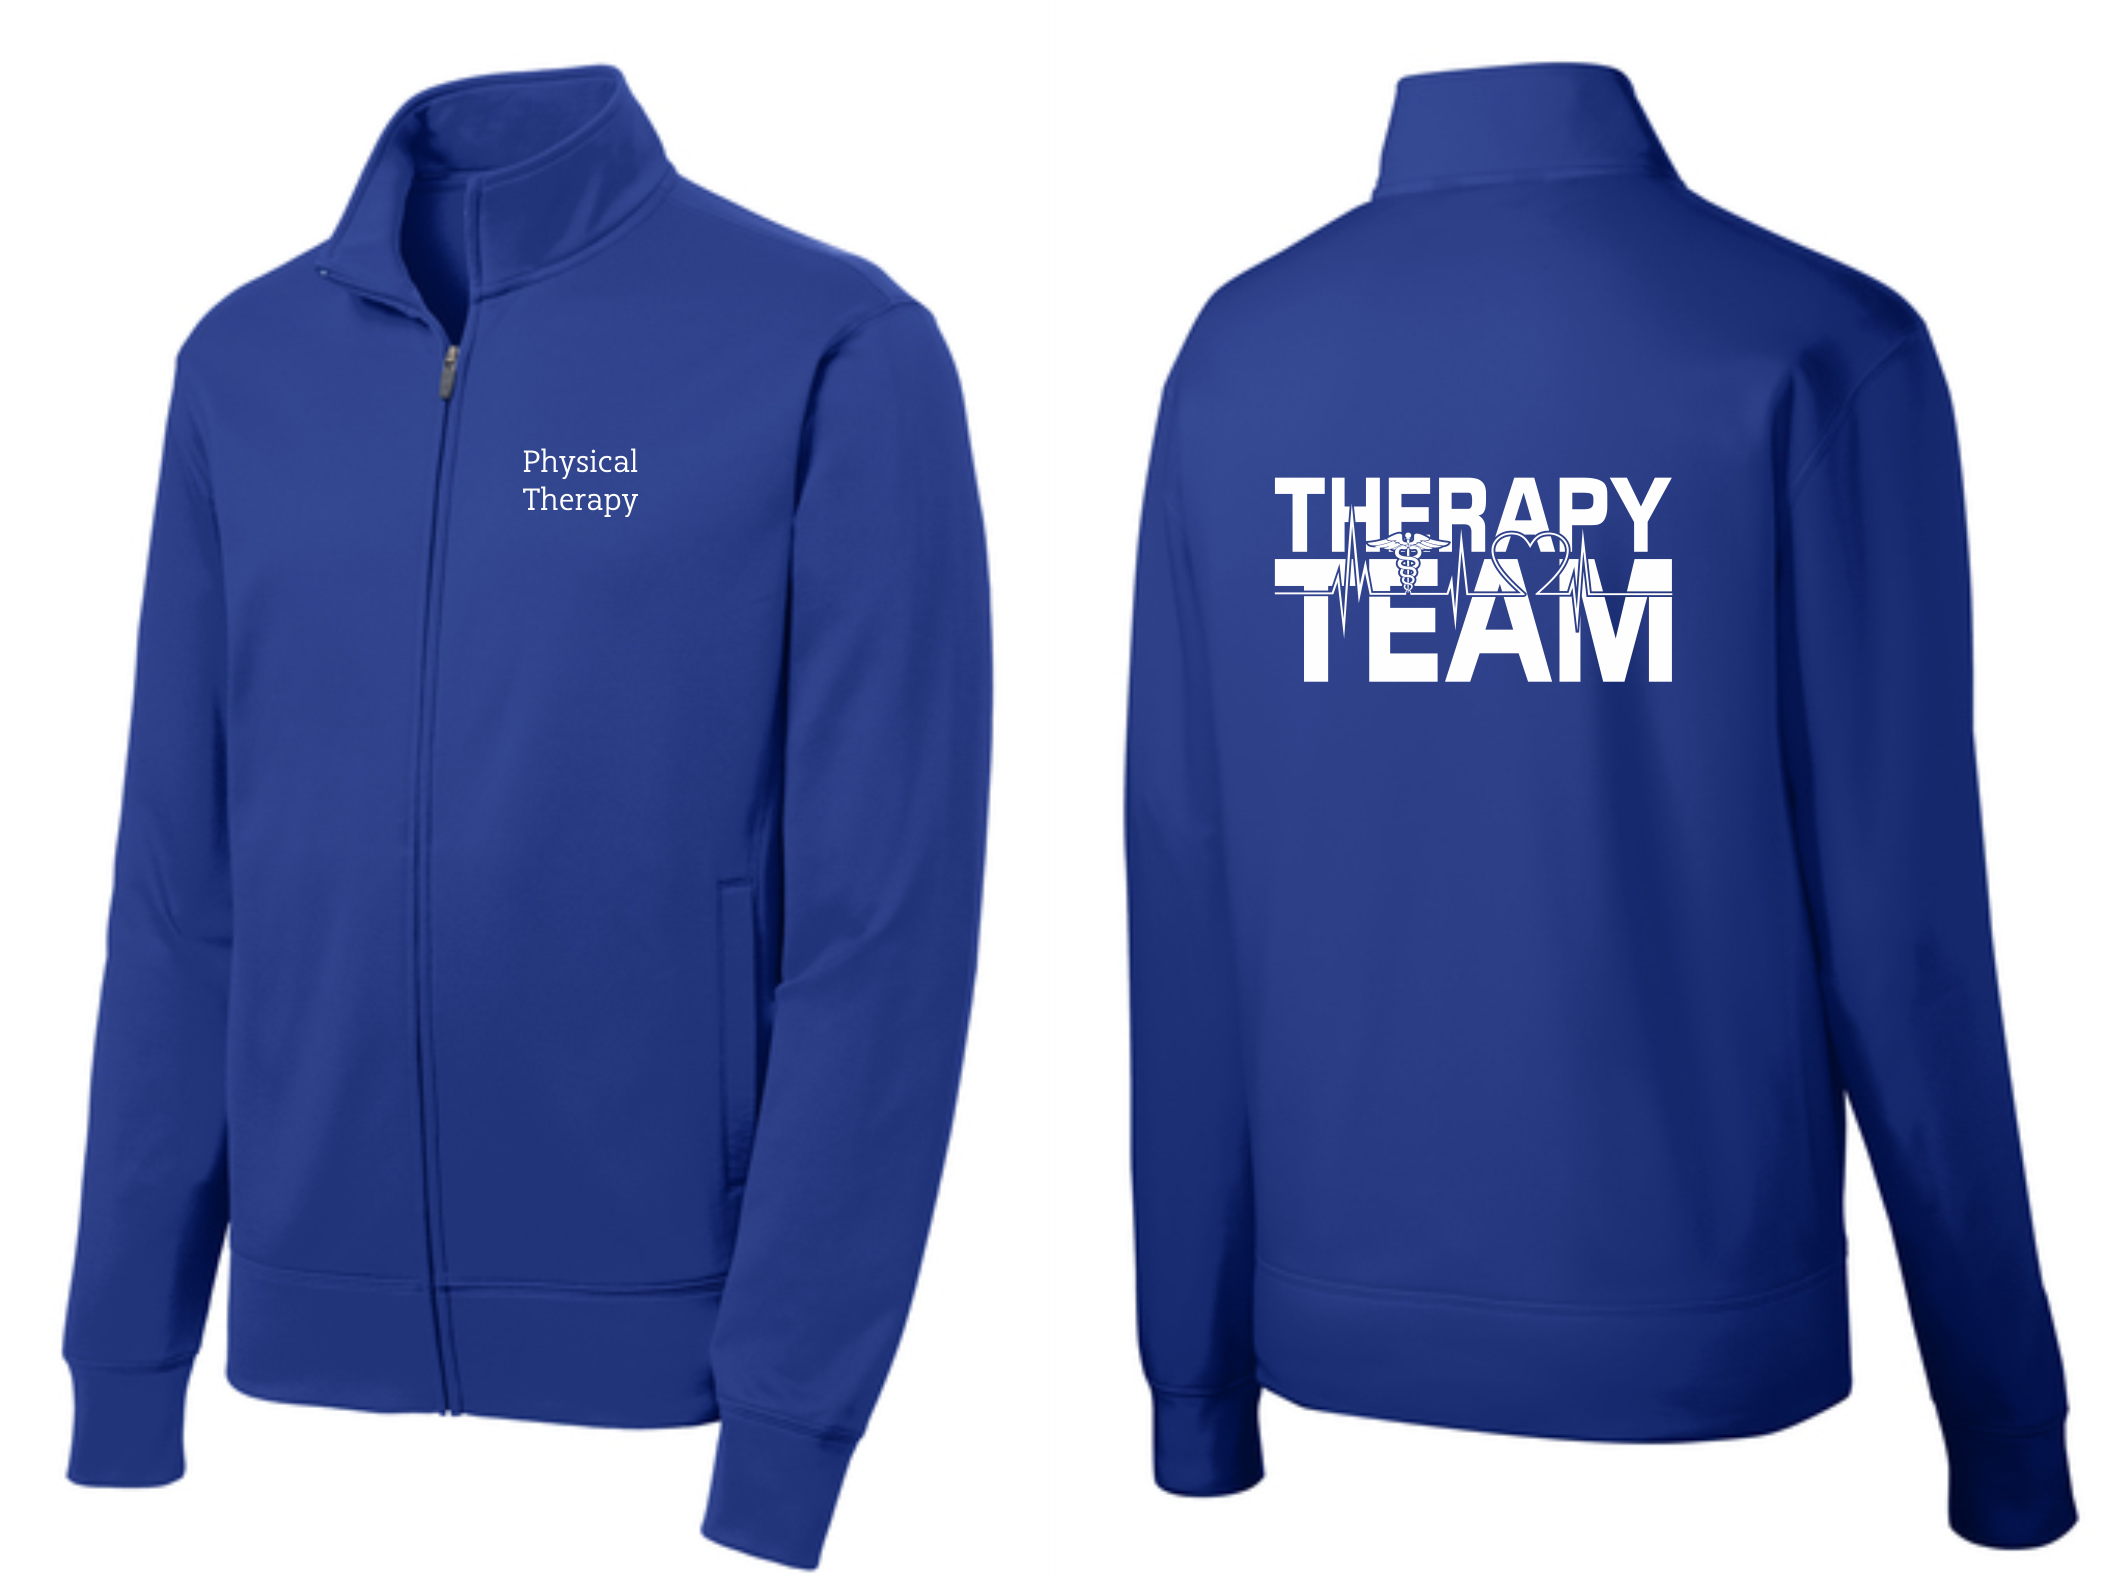 PHW - Physical Therapy Team - Mens 1/2 or Full Zip Jacket